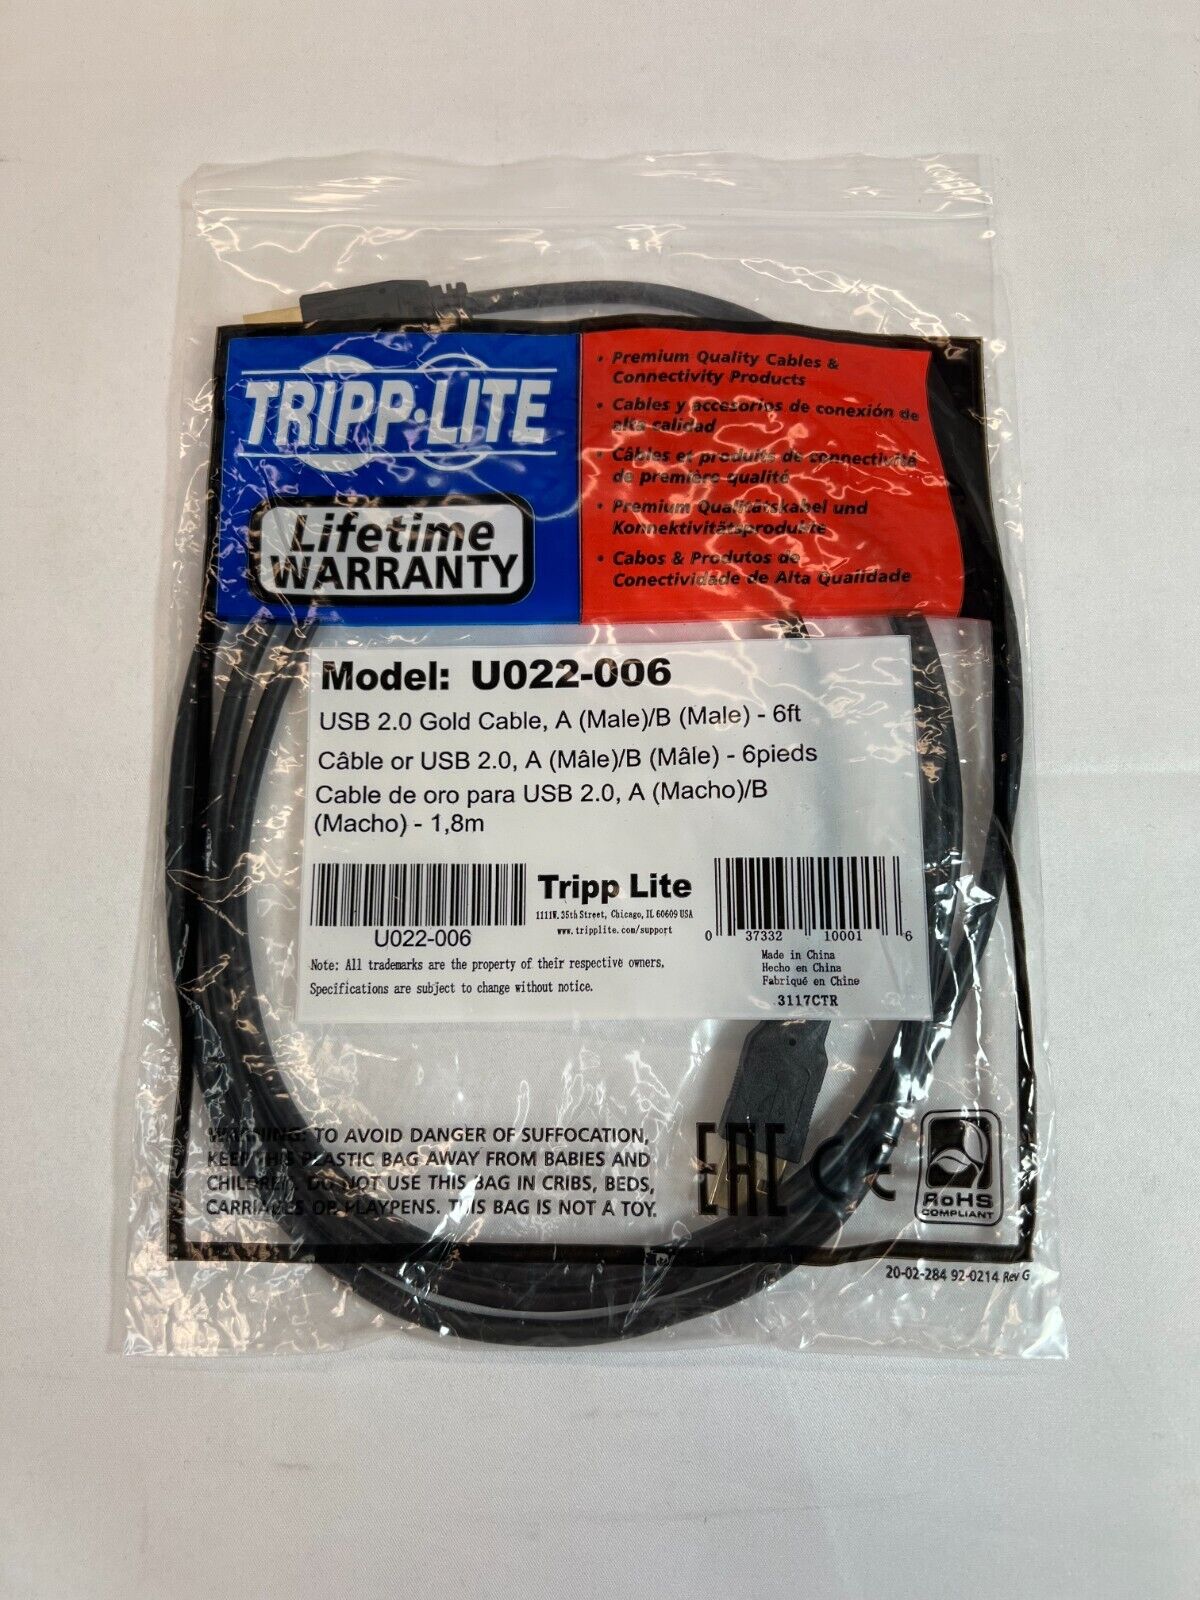 Trippe Lite USB 2.0 Gold Cable, A(Male)/B(Male) 6ft. U022-006